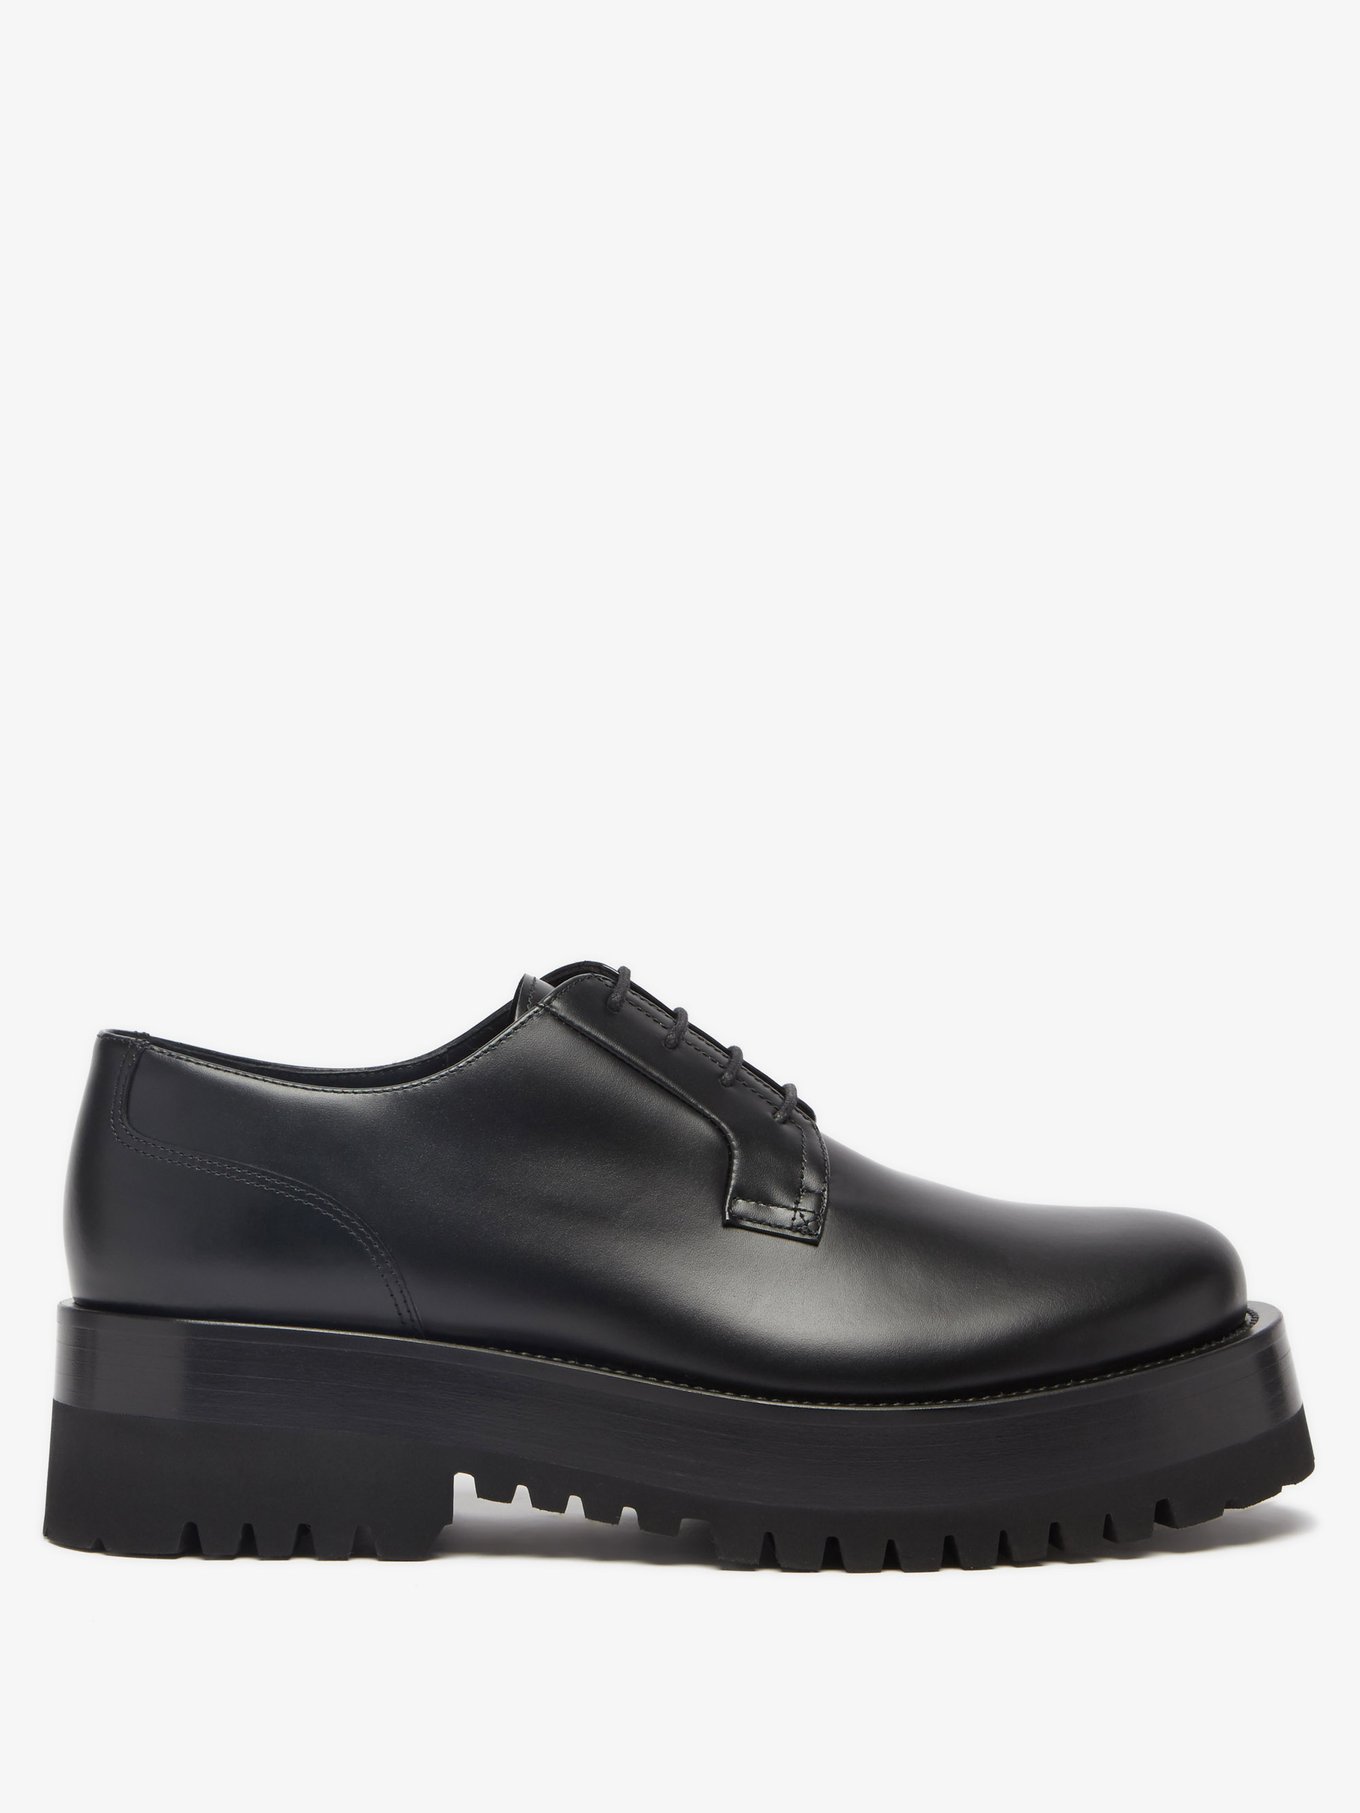 Upraise leather derby shoes | Valentino